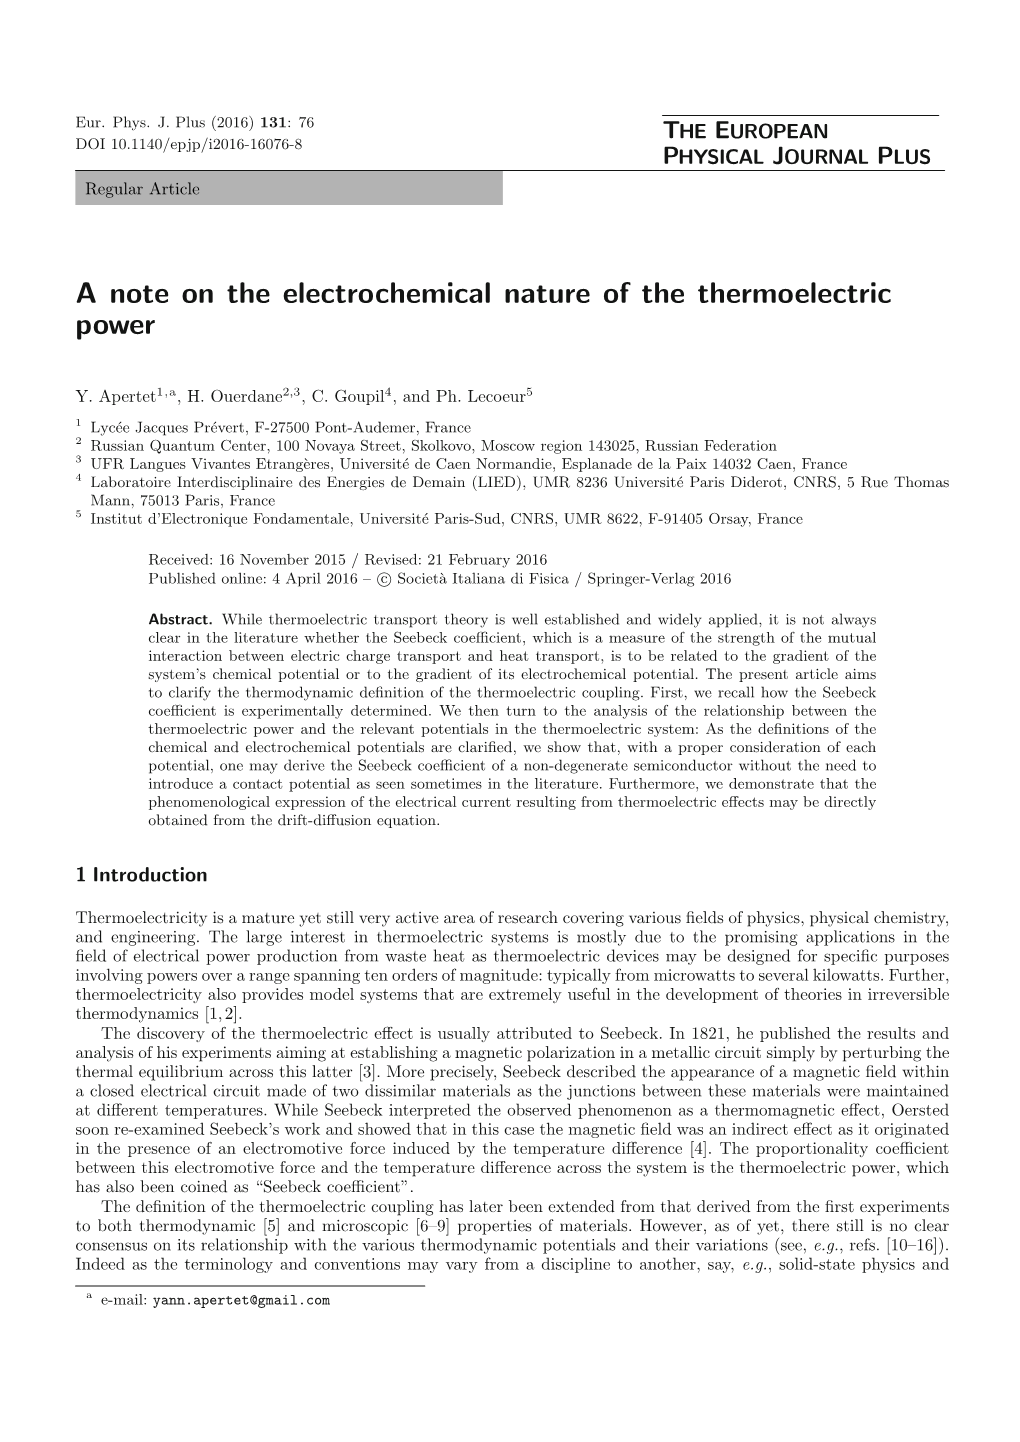 A Note on the Electrochemical Nature of the Thermoelectric Power